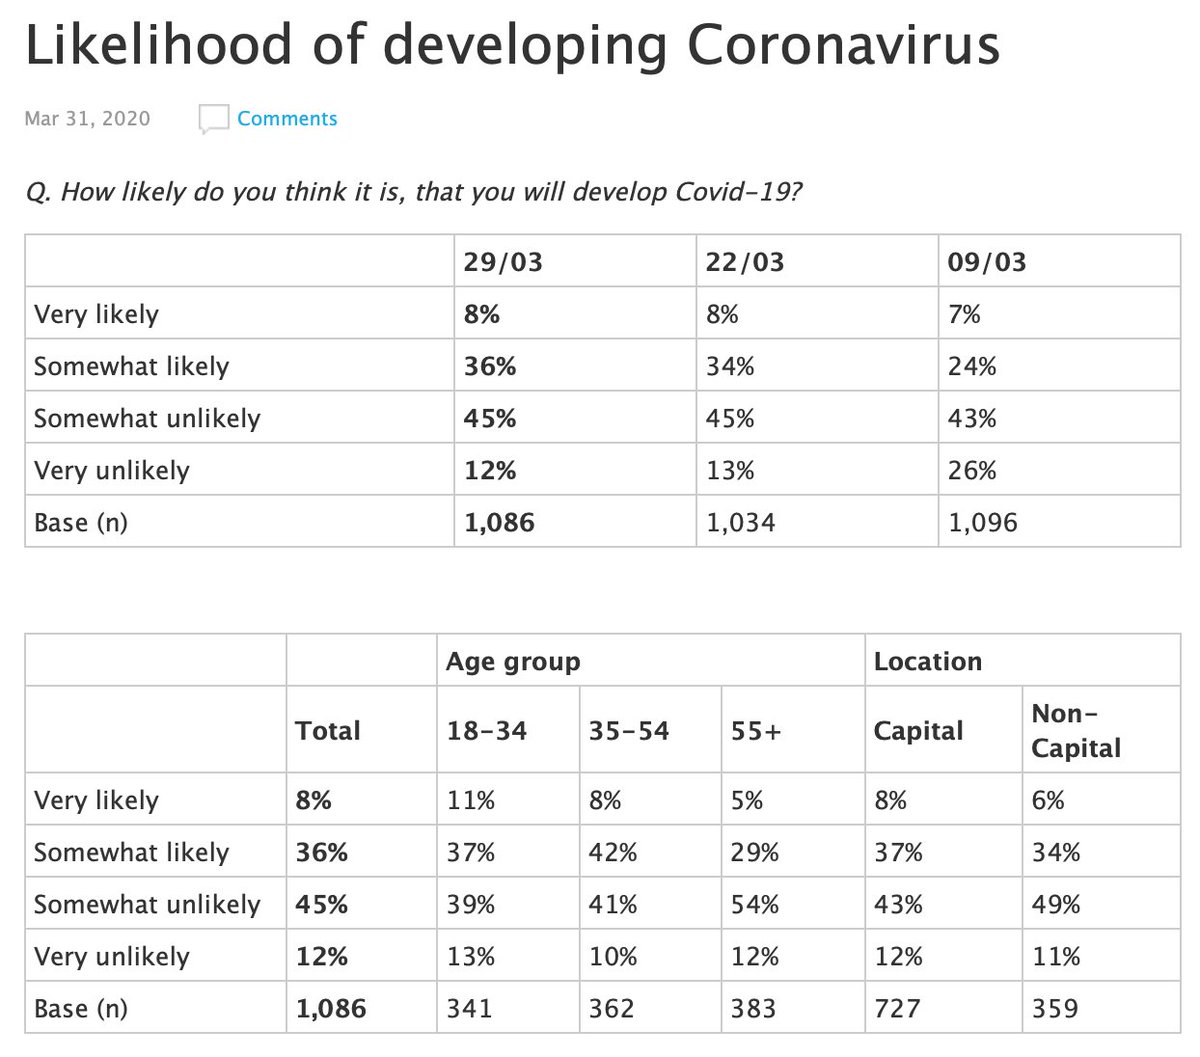 “Q. How likely do you think it is, that you will develop Covid-19?” Much the same.  https://essentialvision.com.au/likelihood-of-developing-coronavirus-2